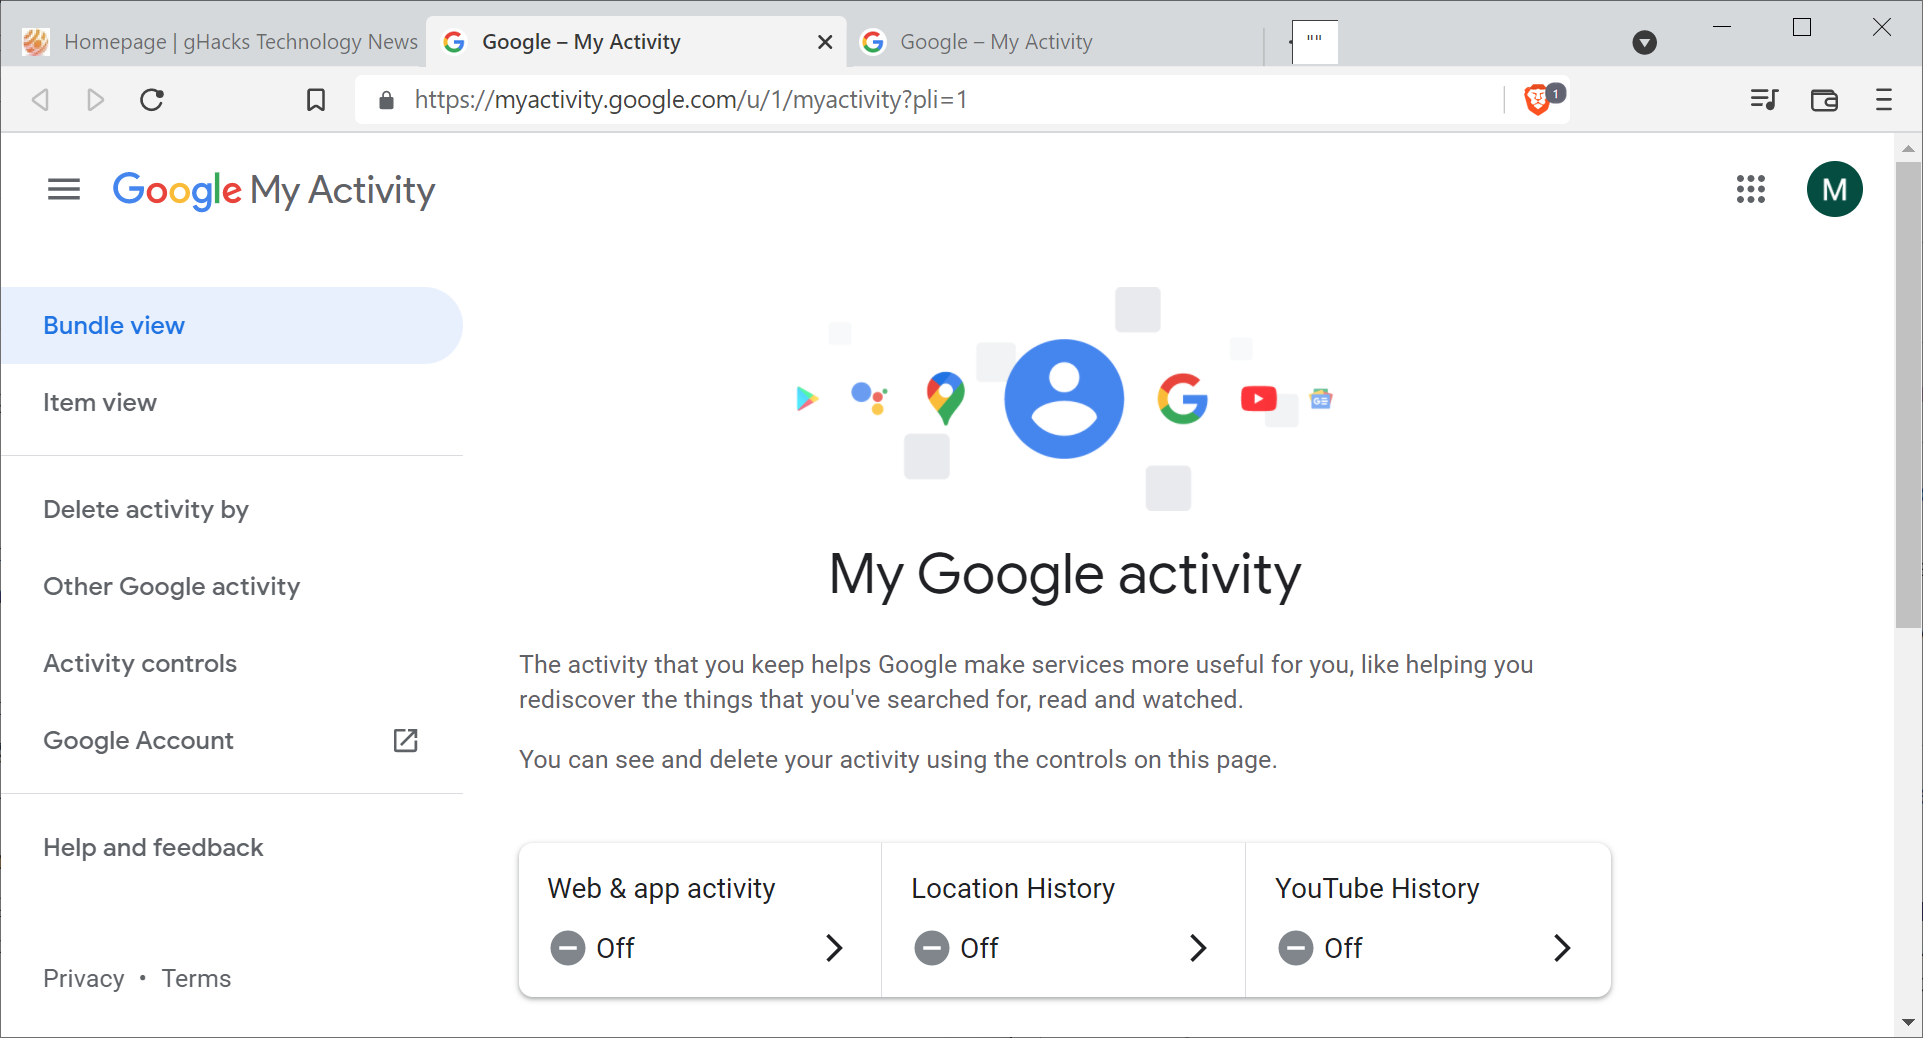 Google is turning search history tracking on for all Google Workspace customers